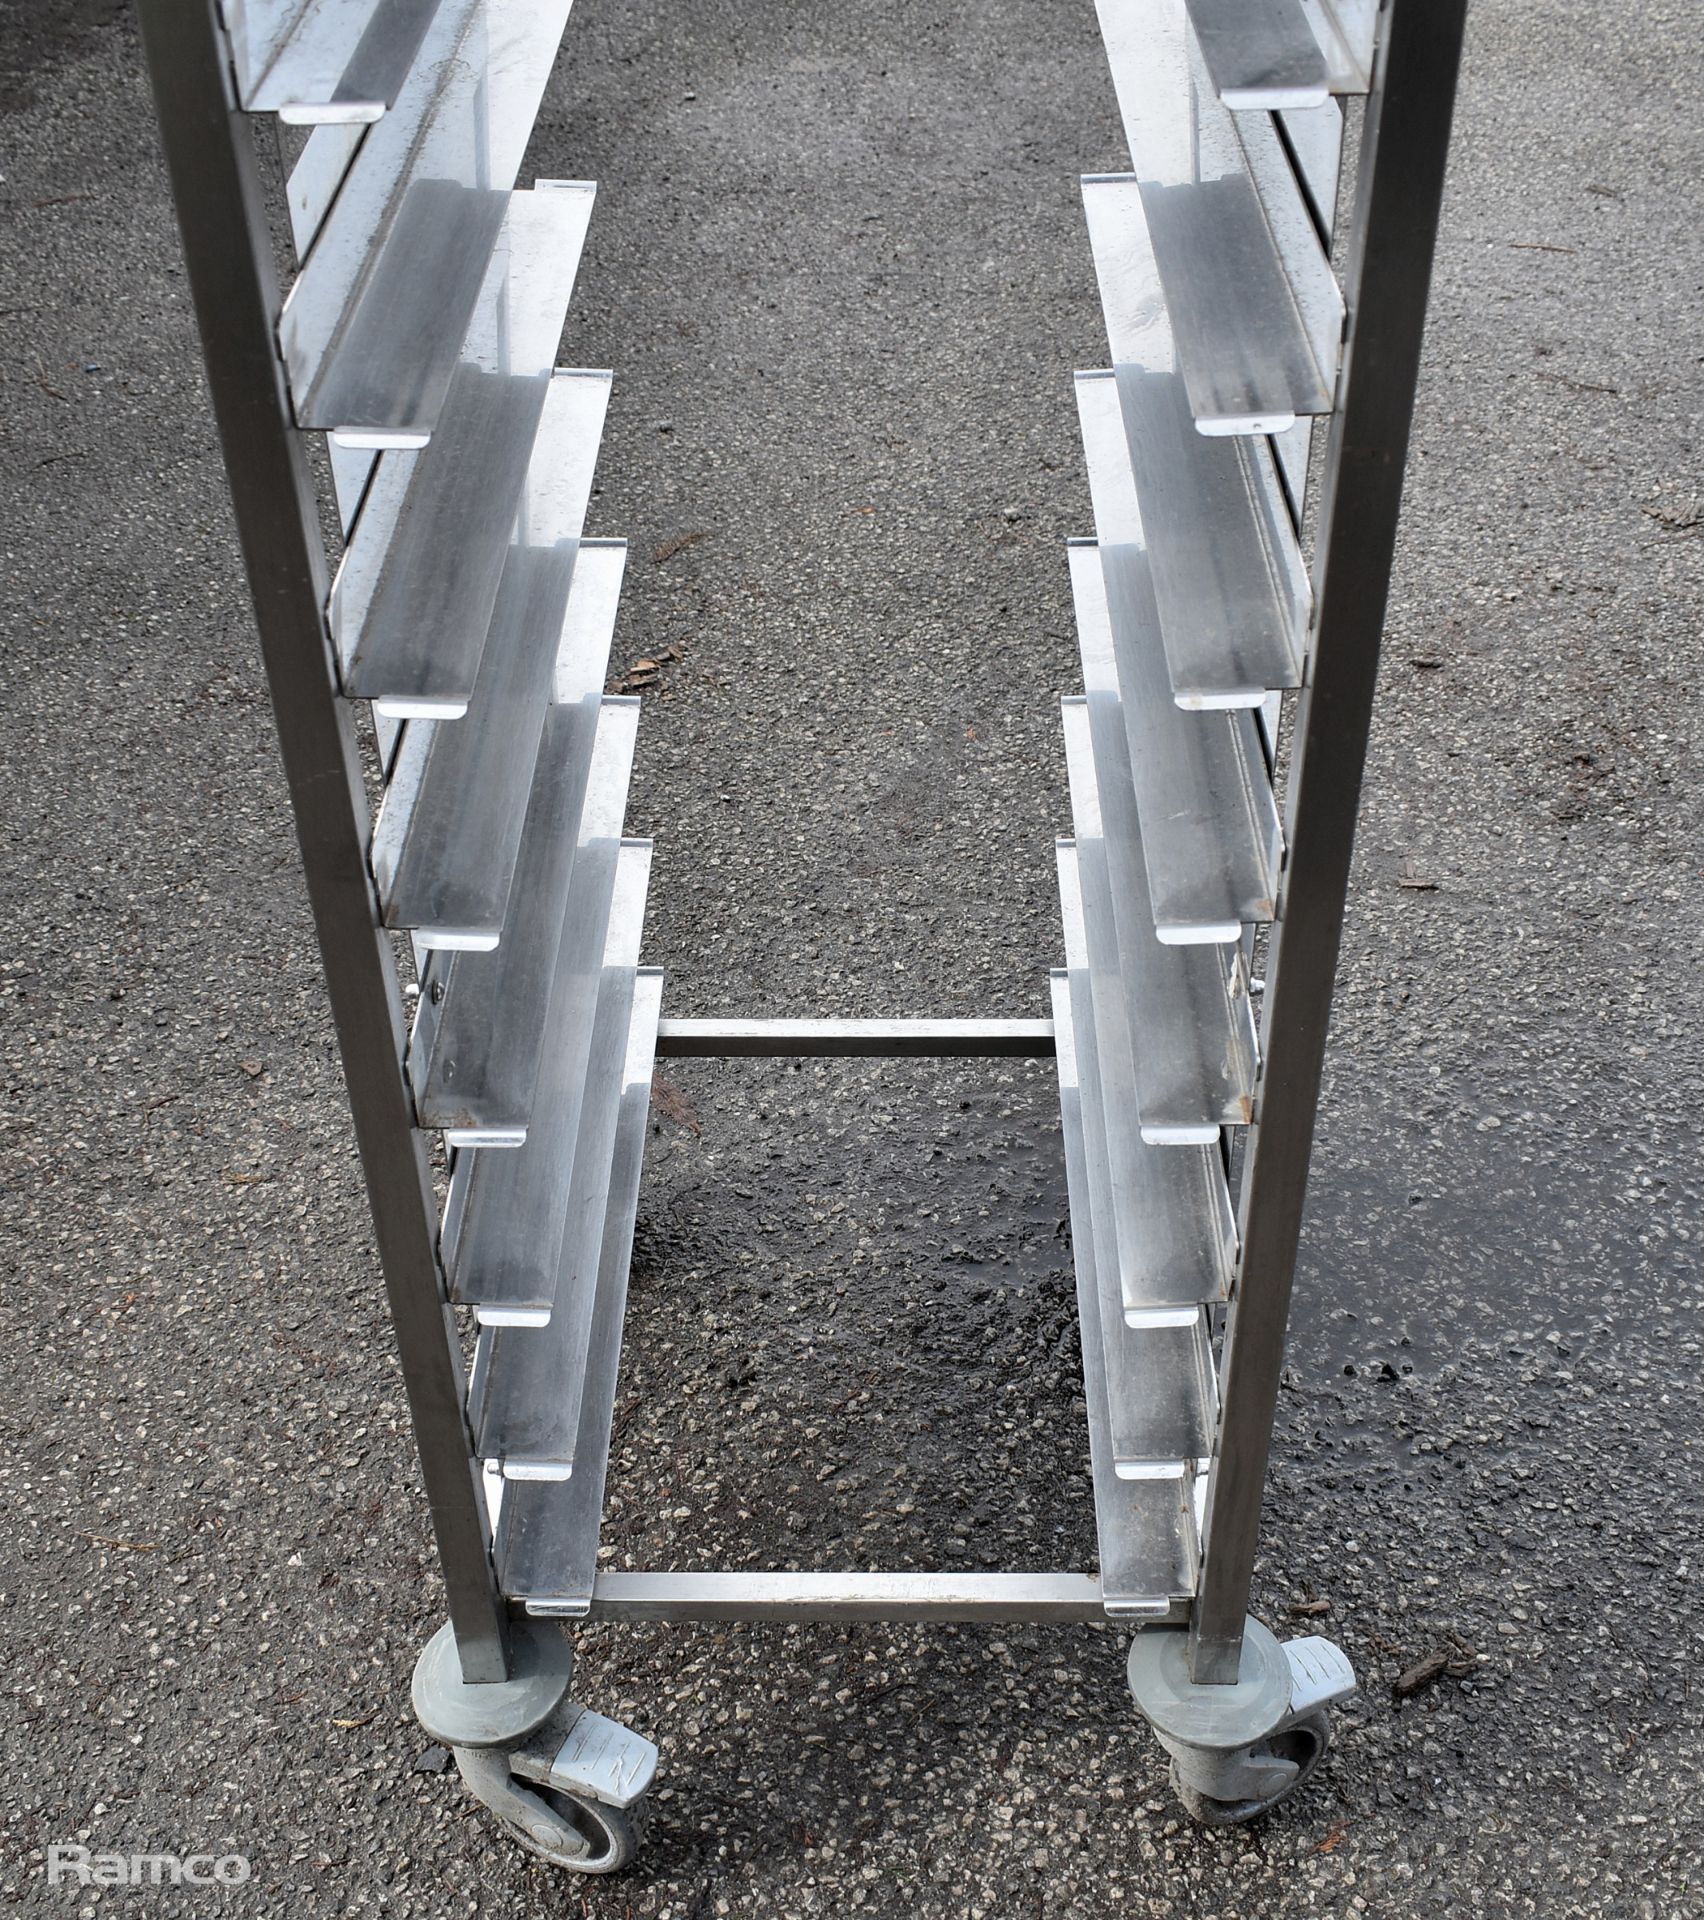 Stainless steel serving tray trolley - L 600 x W 450 x H 1650mm - Image 3 of 3